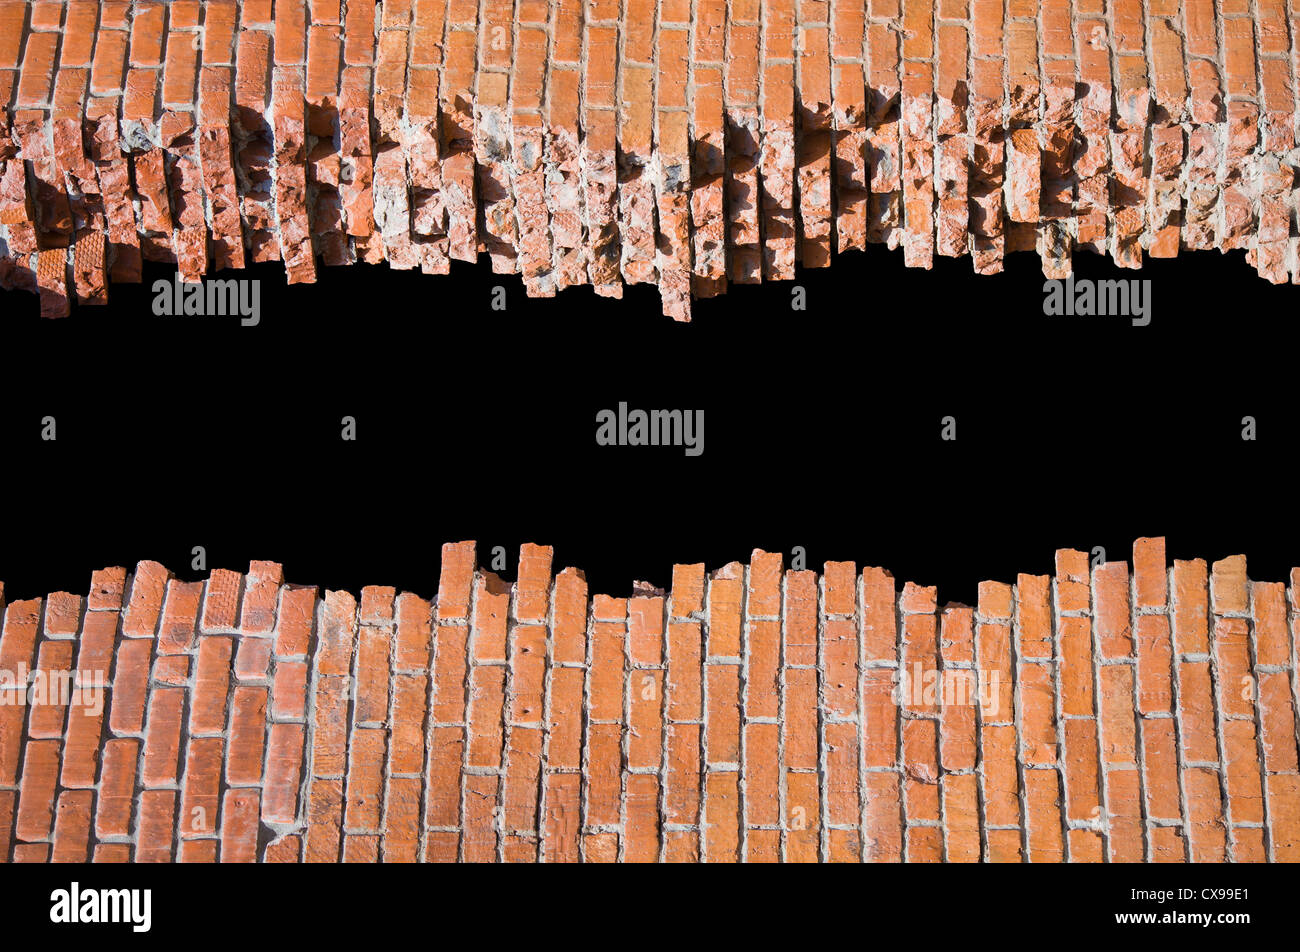 Brocken brick wall with copyspace for your text Stock Photo